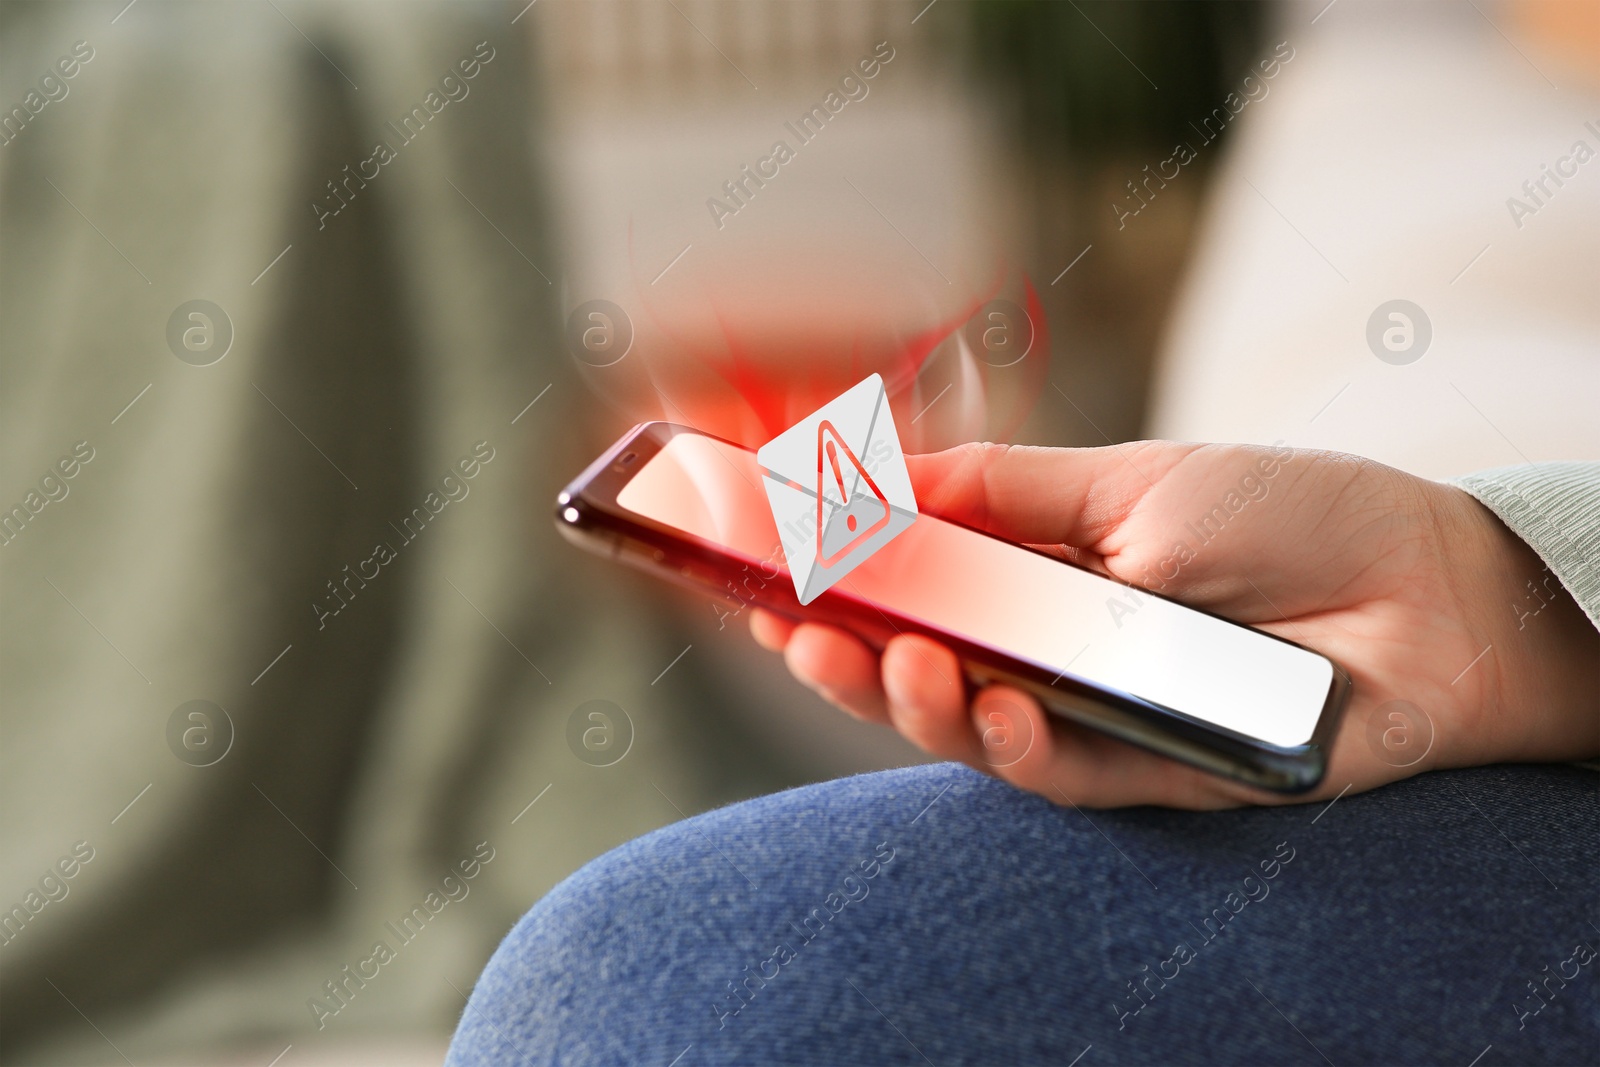 Image of Woman using smartphone indoors, closeup. Spam message notification above device, illustration